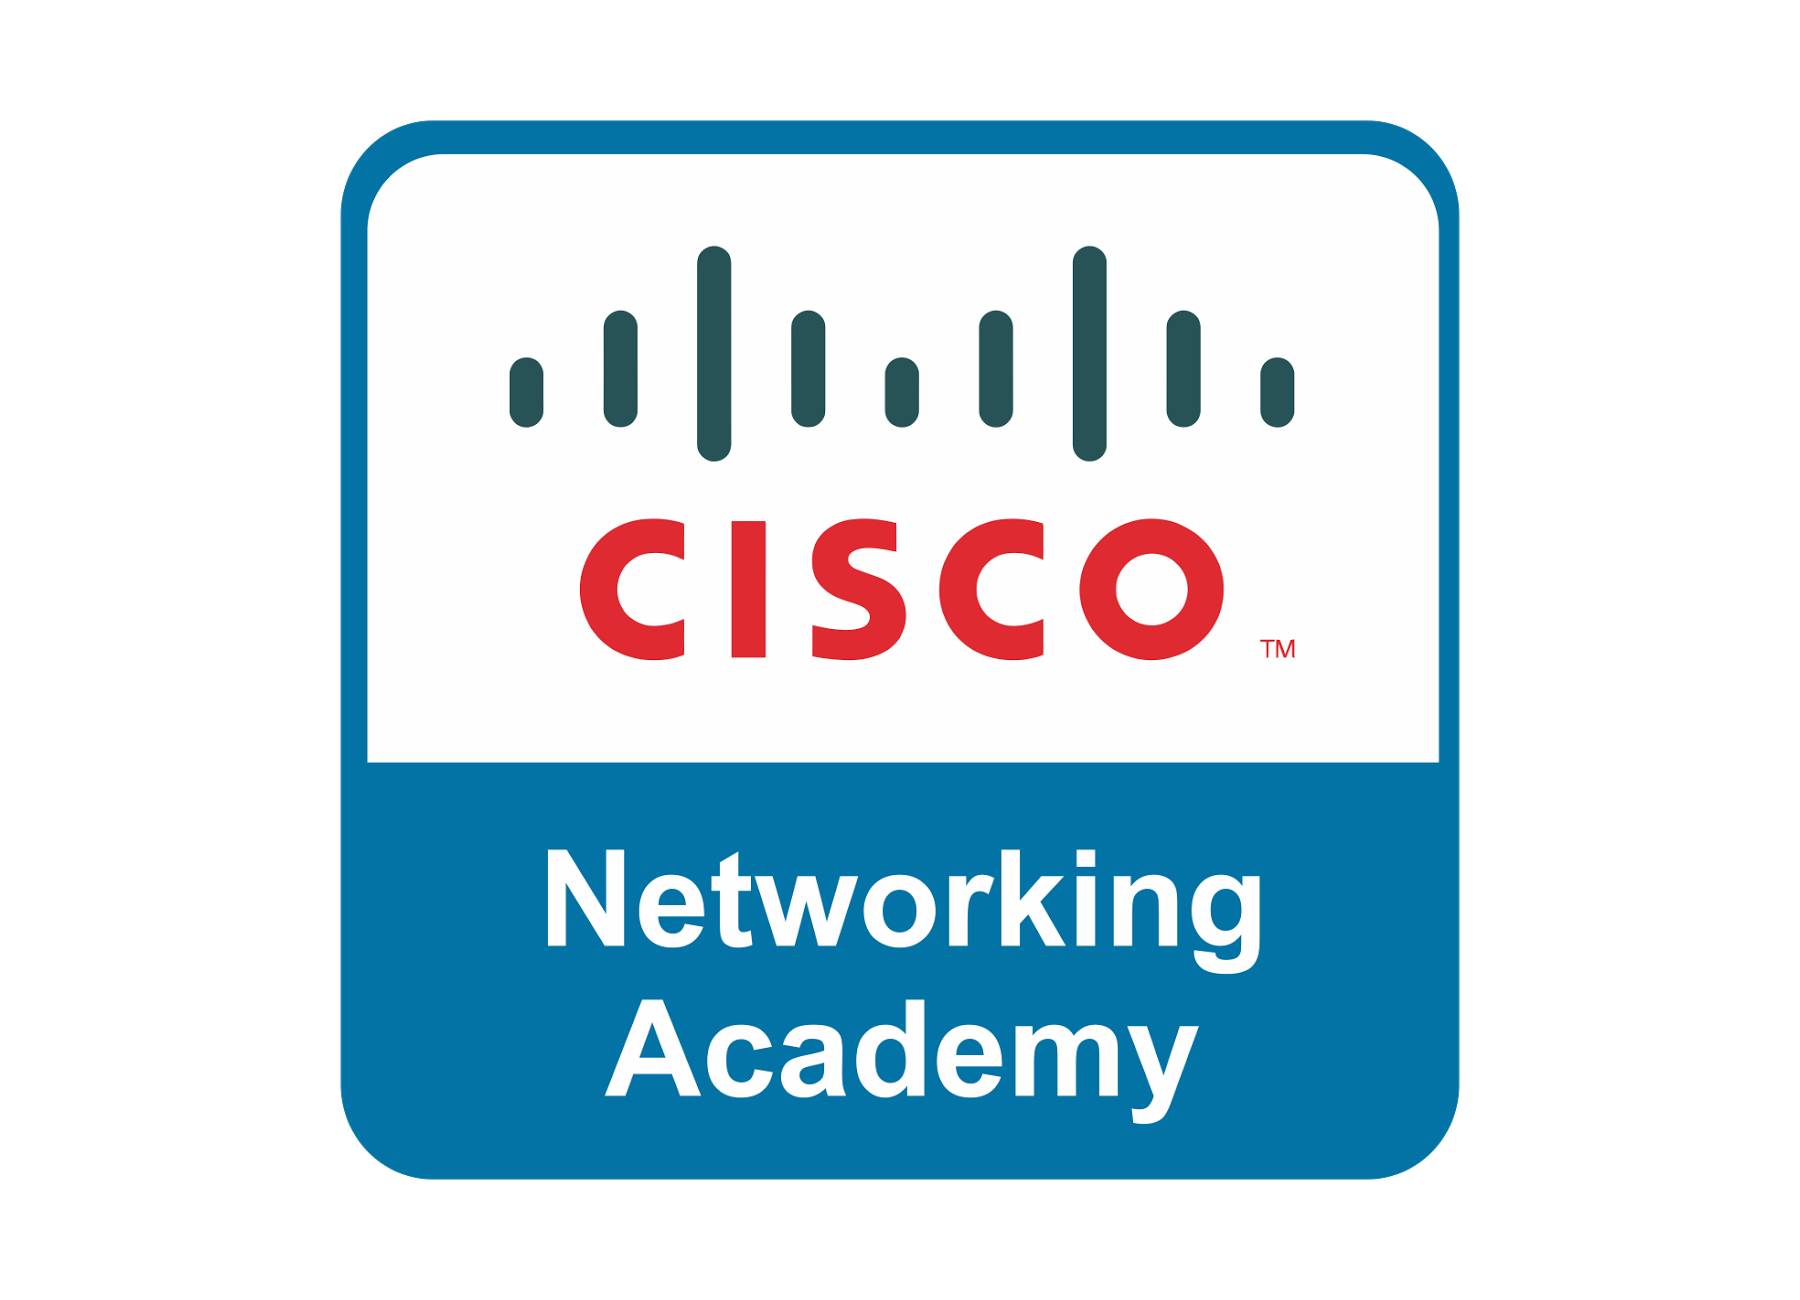 Trainings in information and communication technologies. Cisco Academy